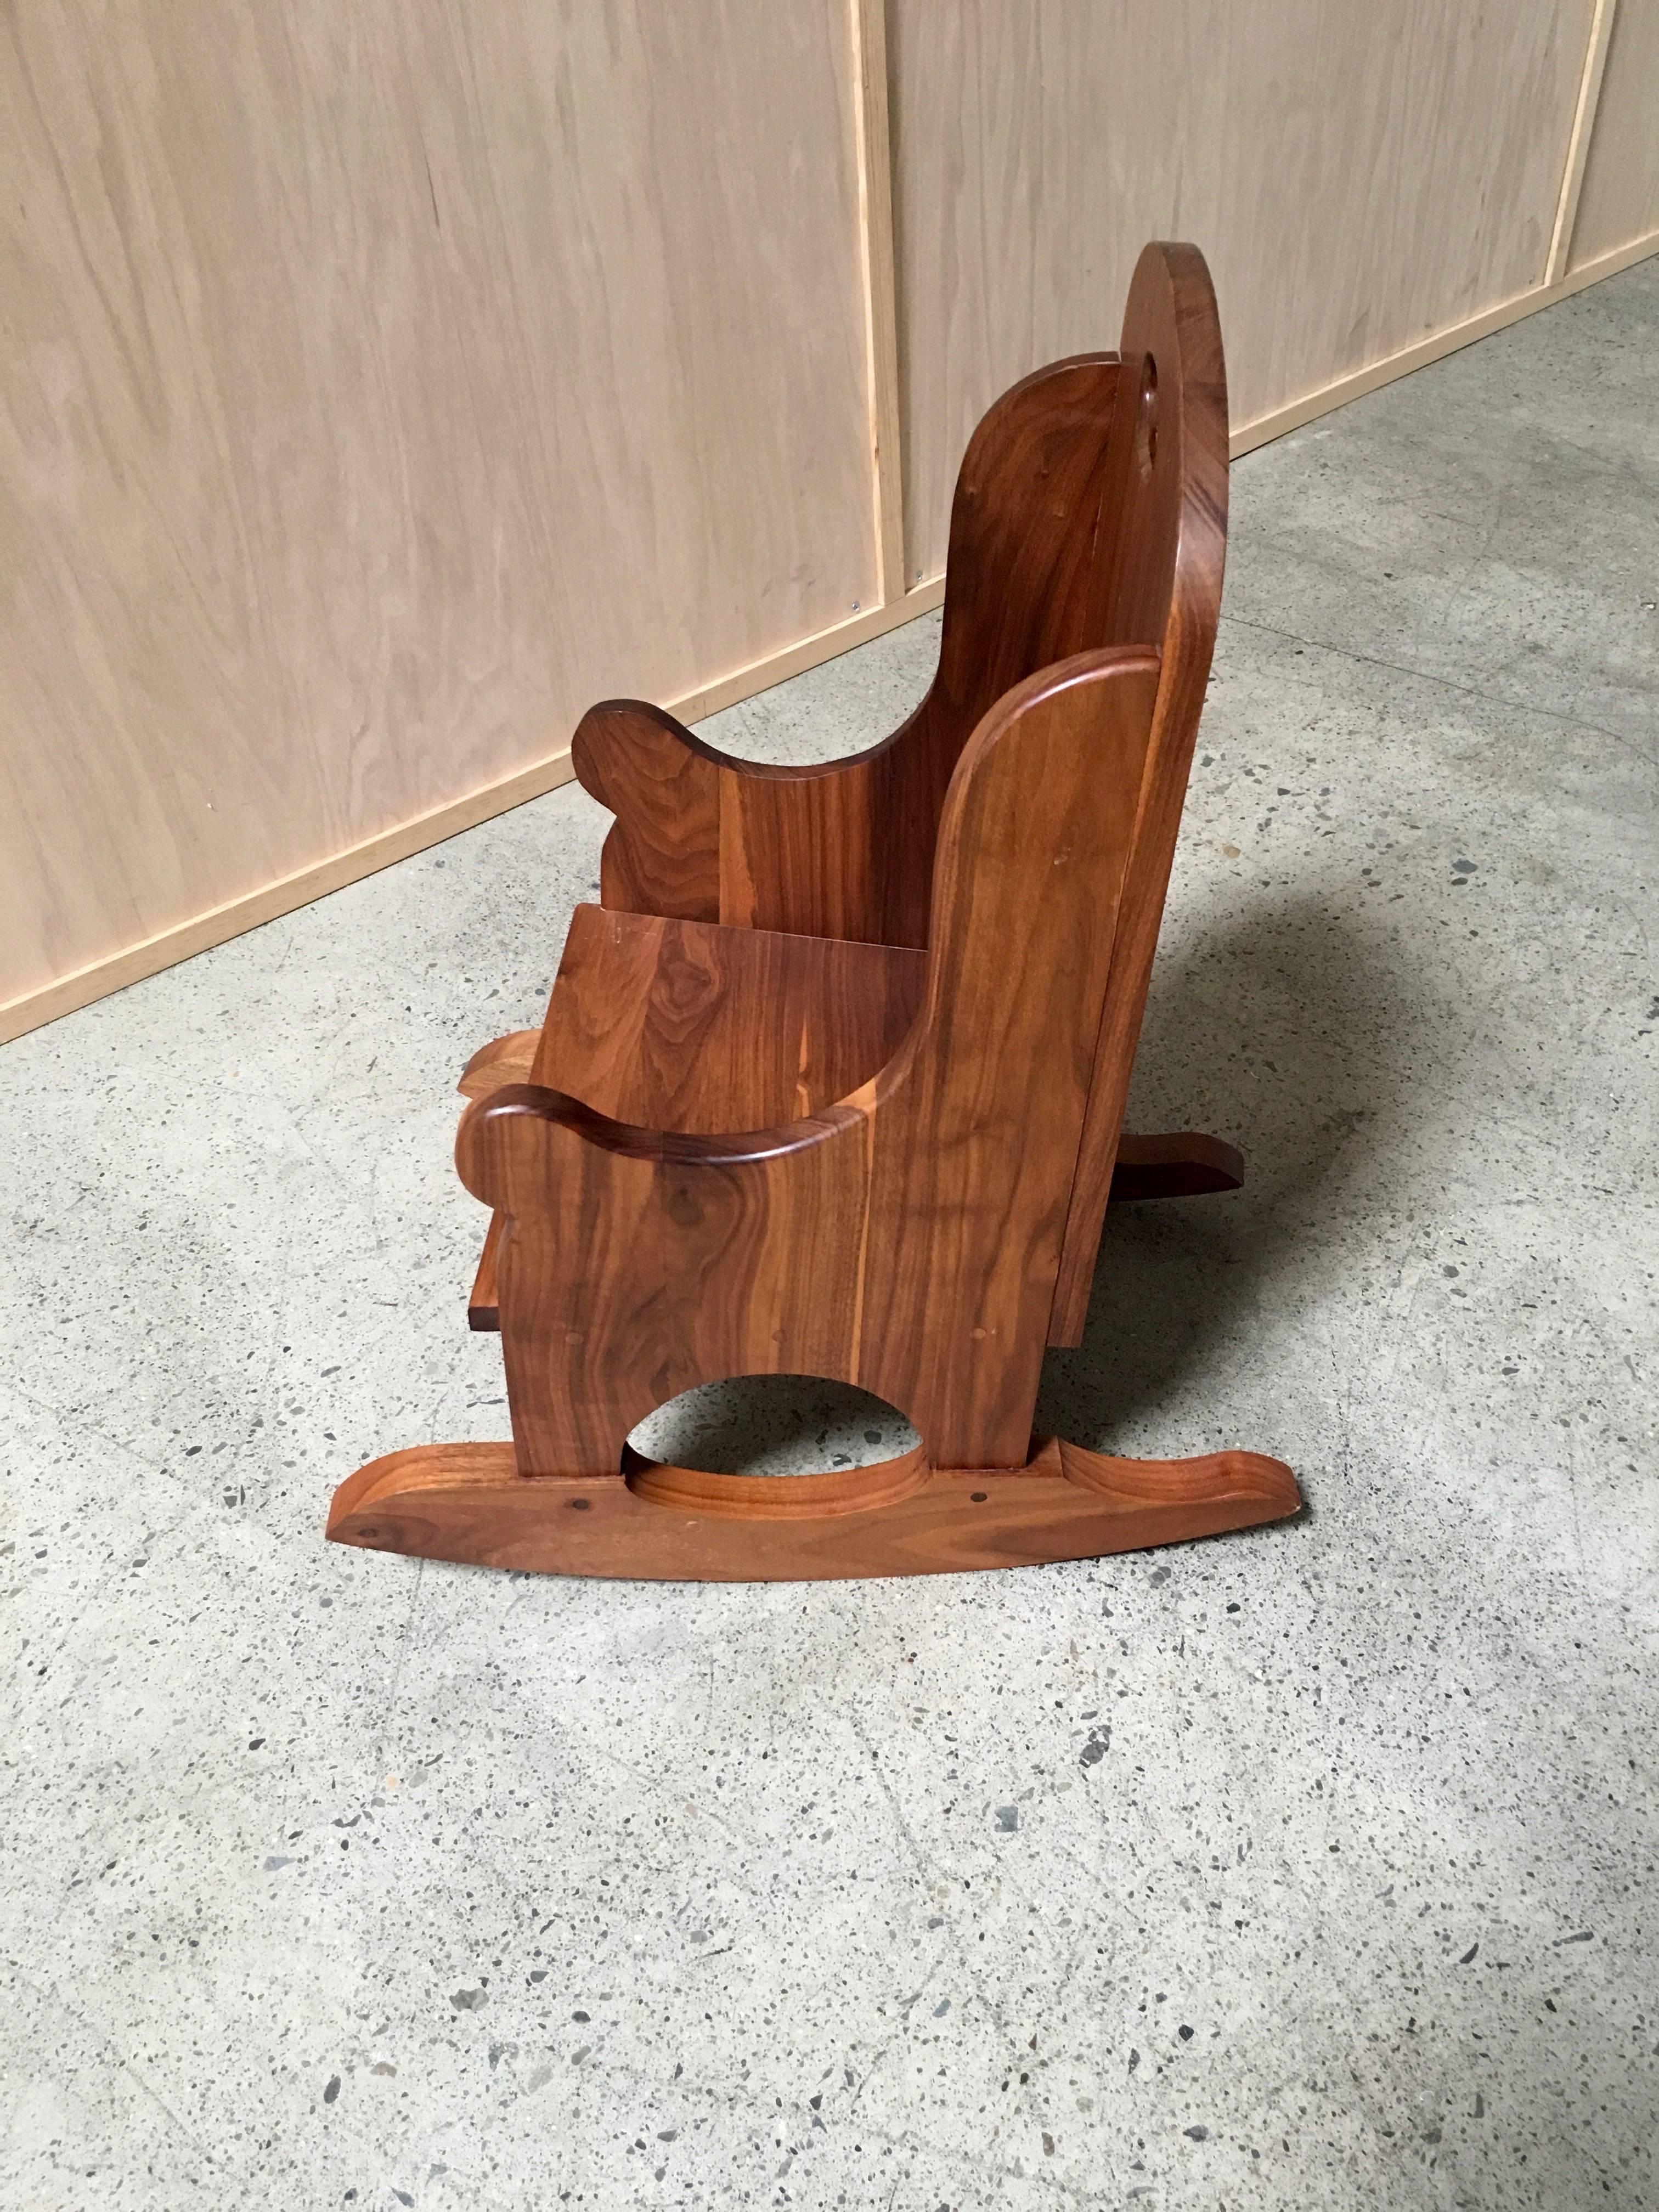 Hand-Crafted Studio Crafted Childs Rocking Chair   MOVING SALE!!!!